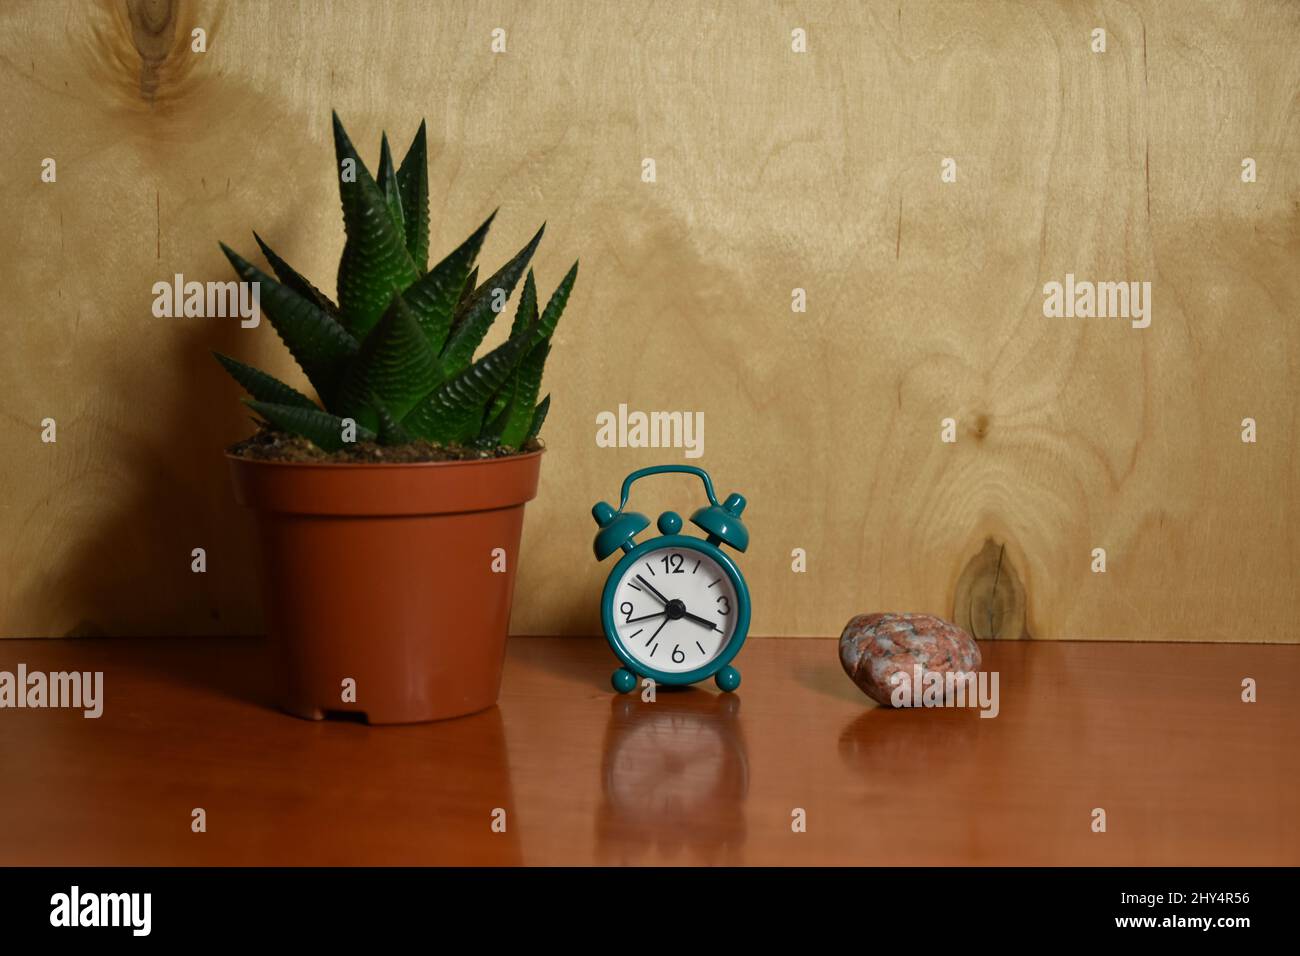 Haworthia limifolia plant, alarm clock, rock, objects composition with wood in the background Stock Photo